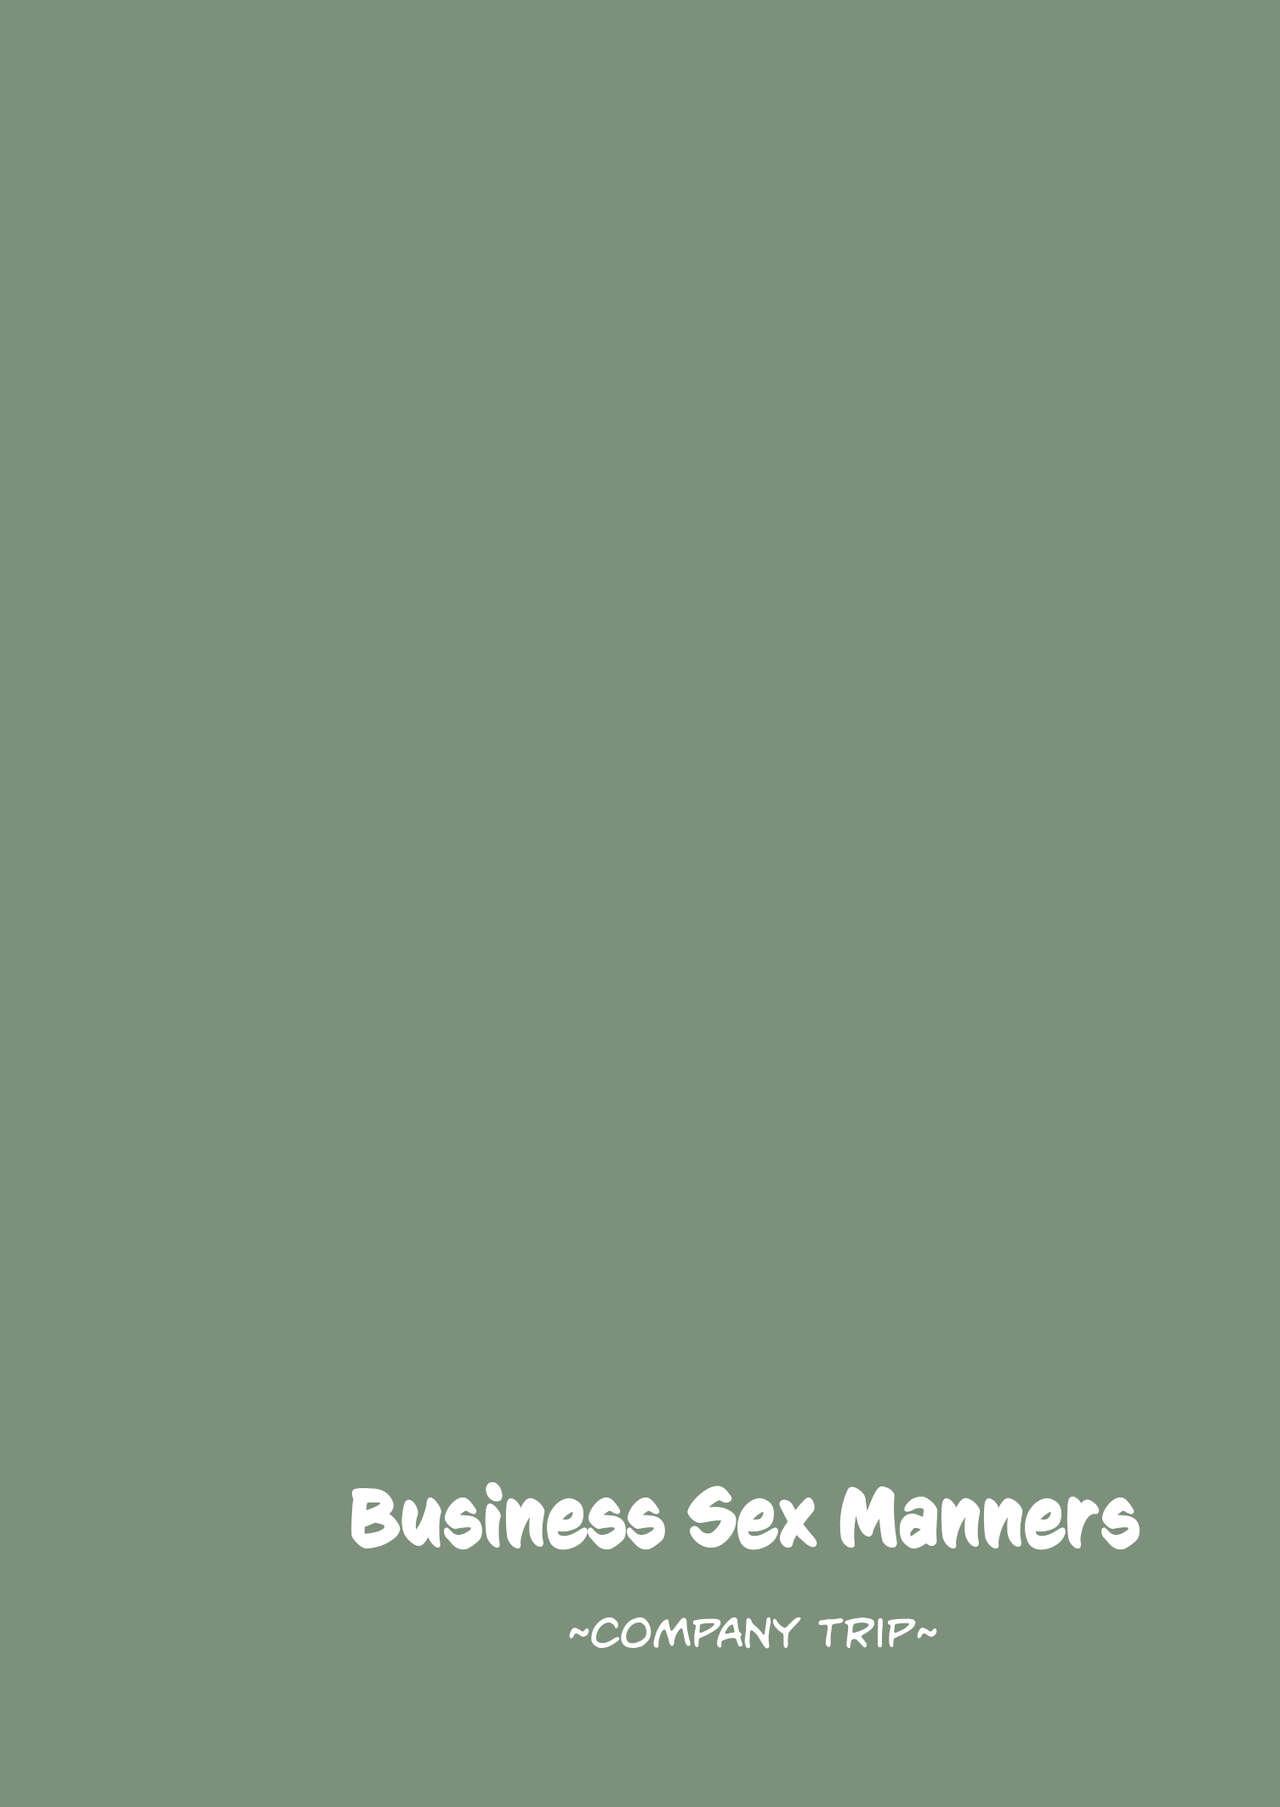 Business Sex Manners 26